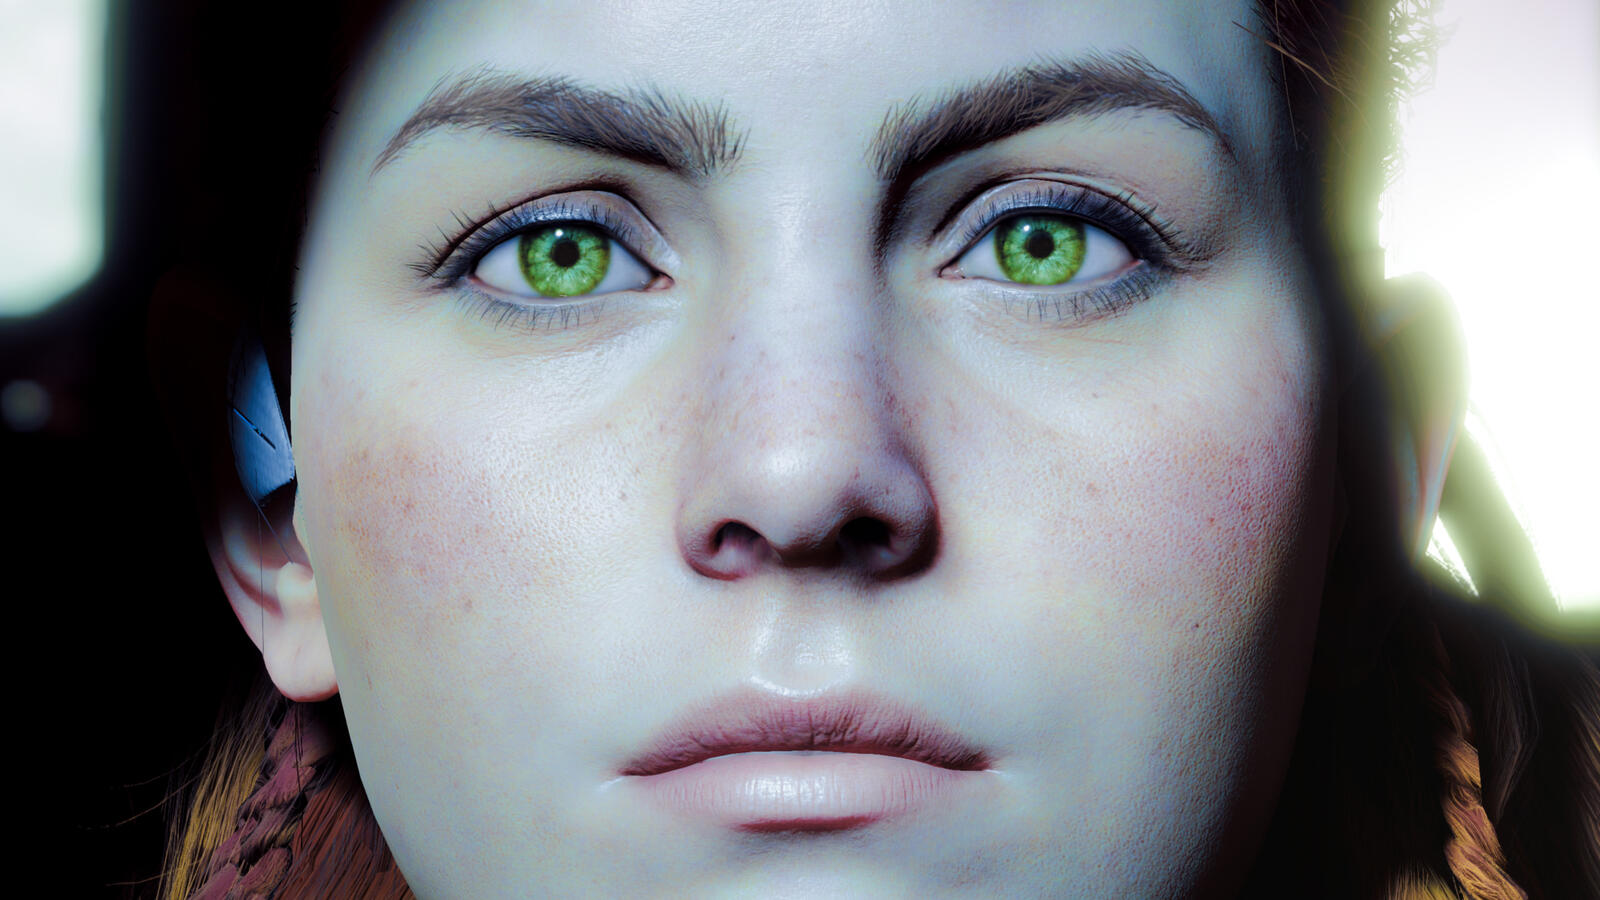 Free photo The face of a woman with bright green eyes